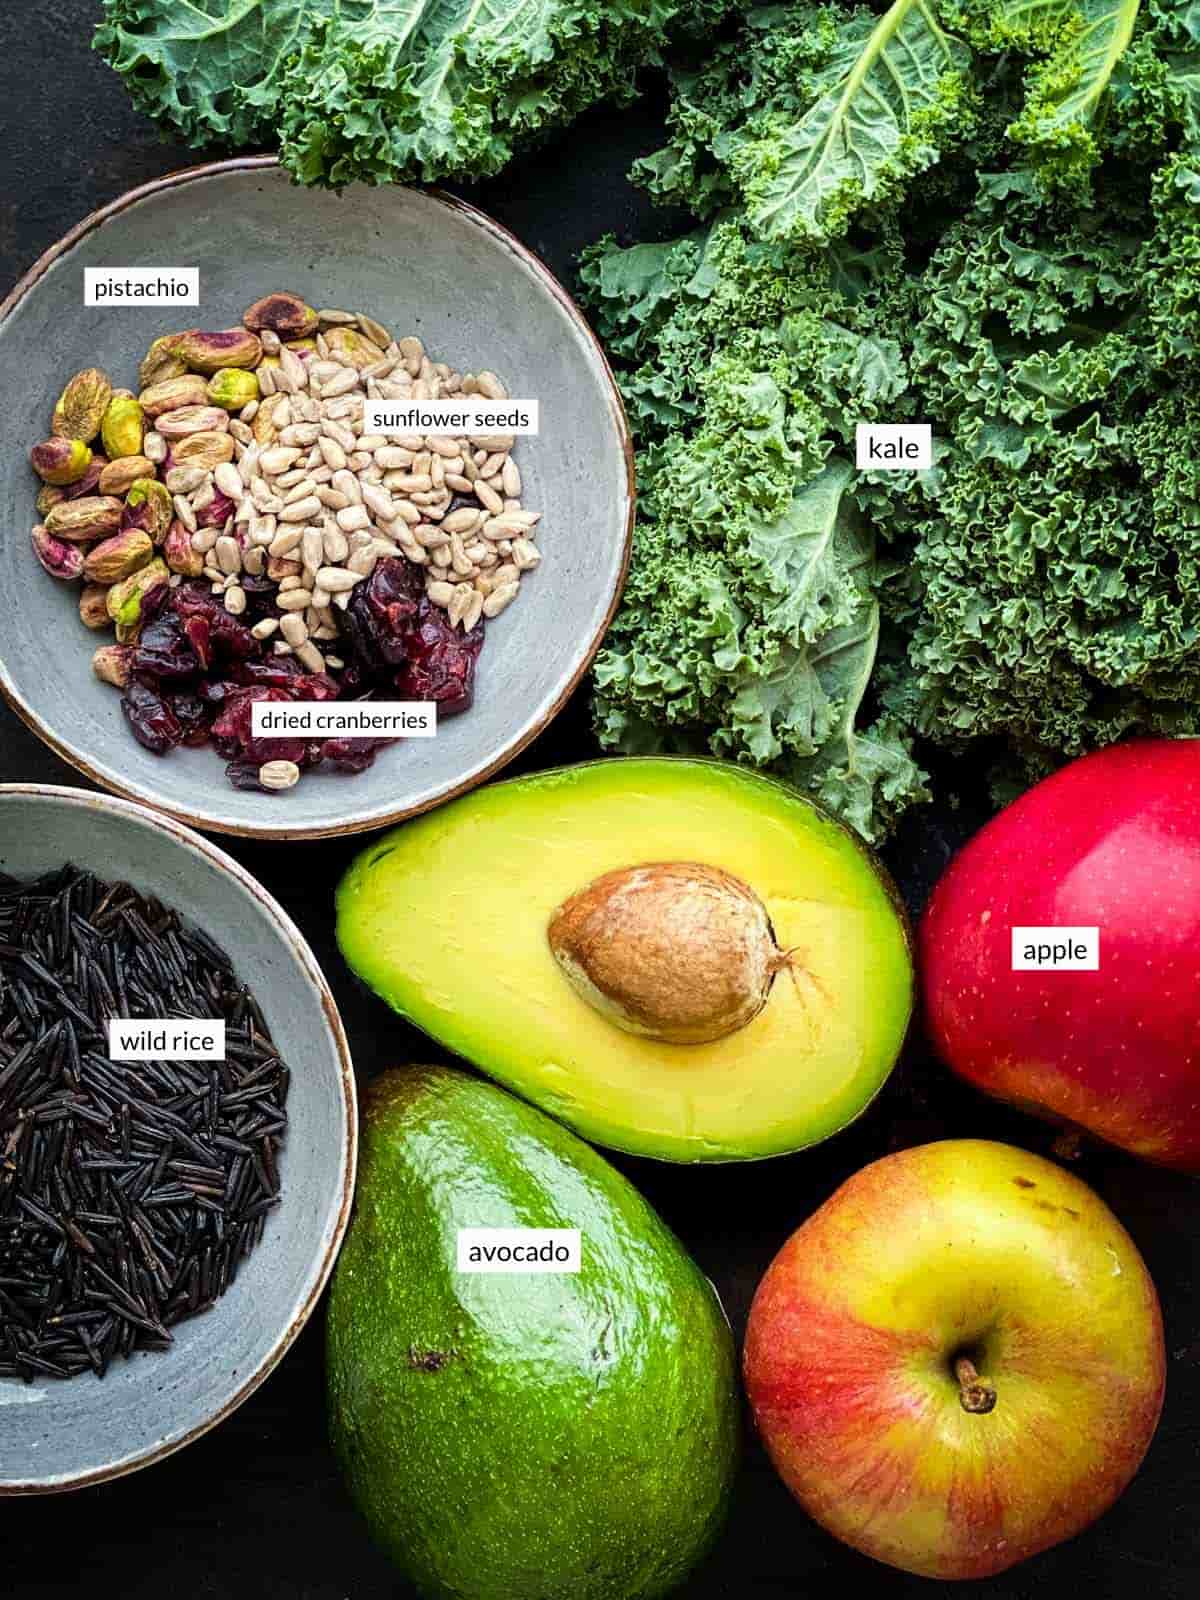 Individually labelled ingredients for kale salad recipe